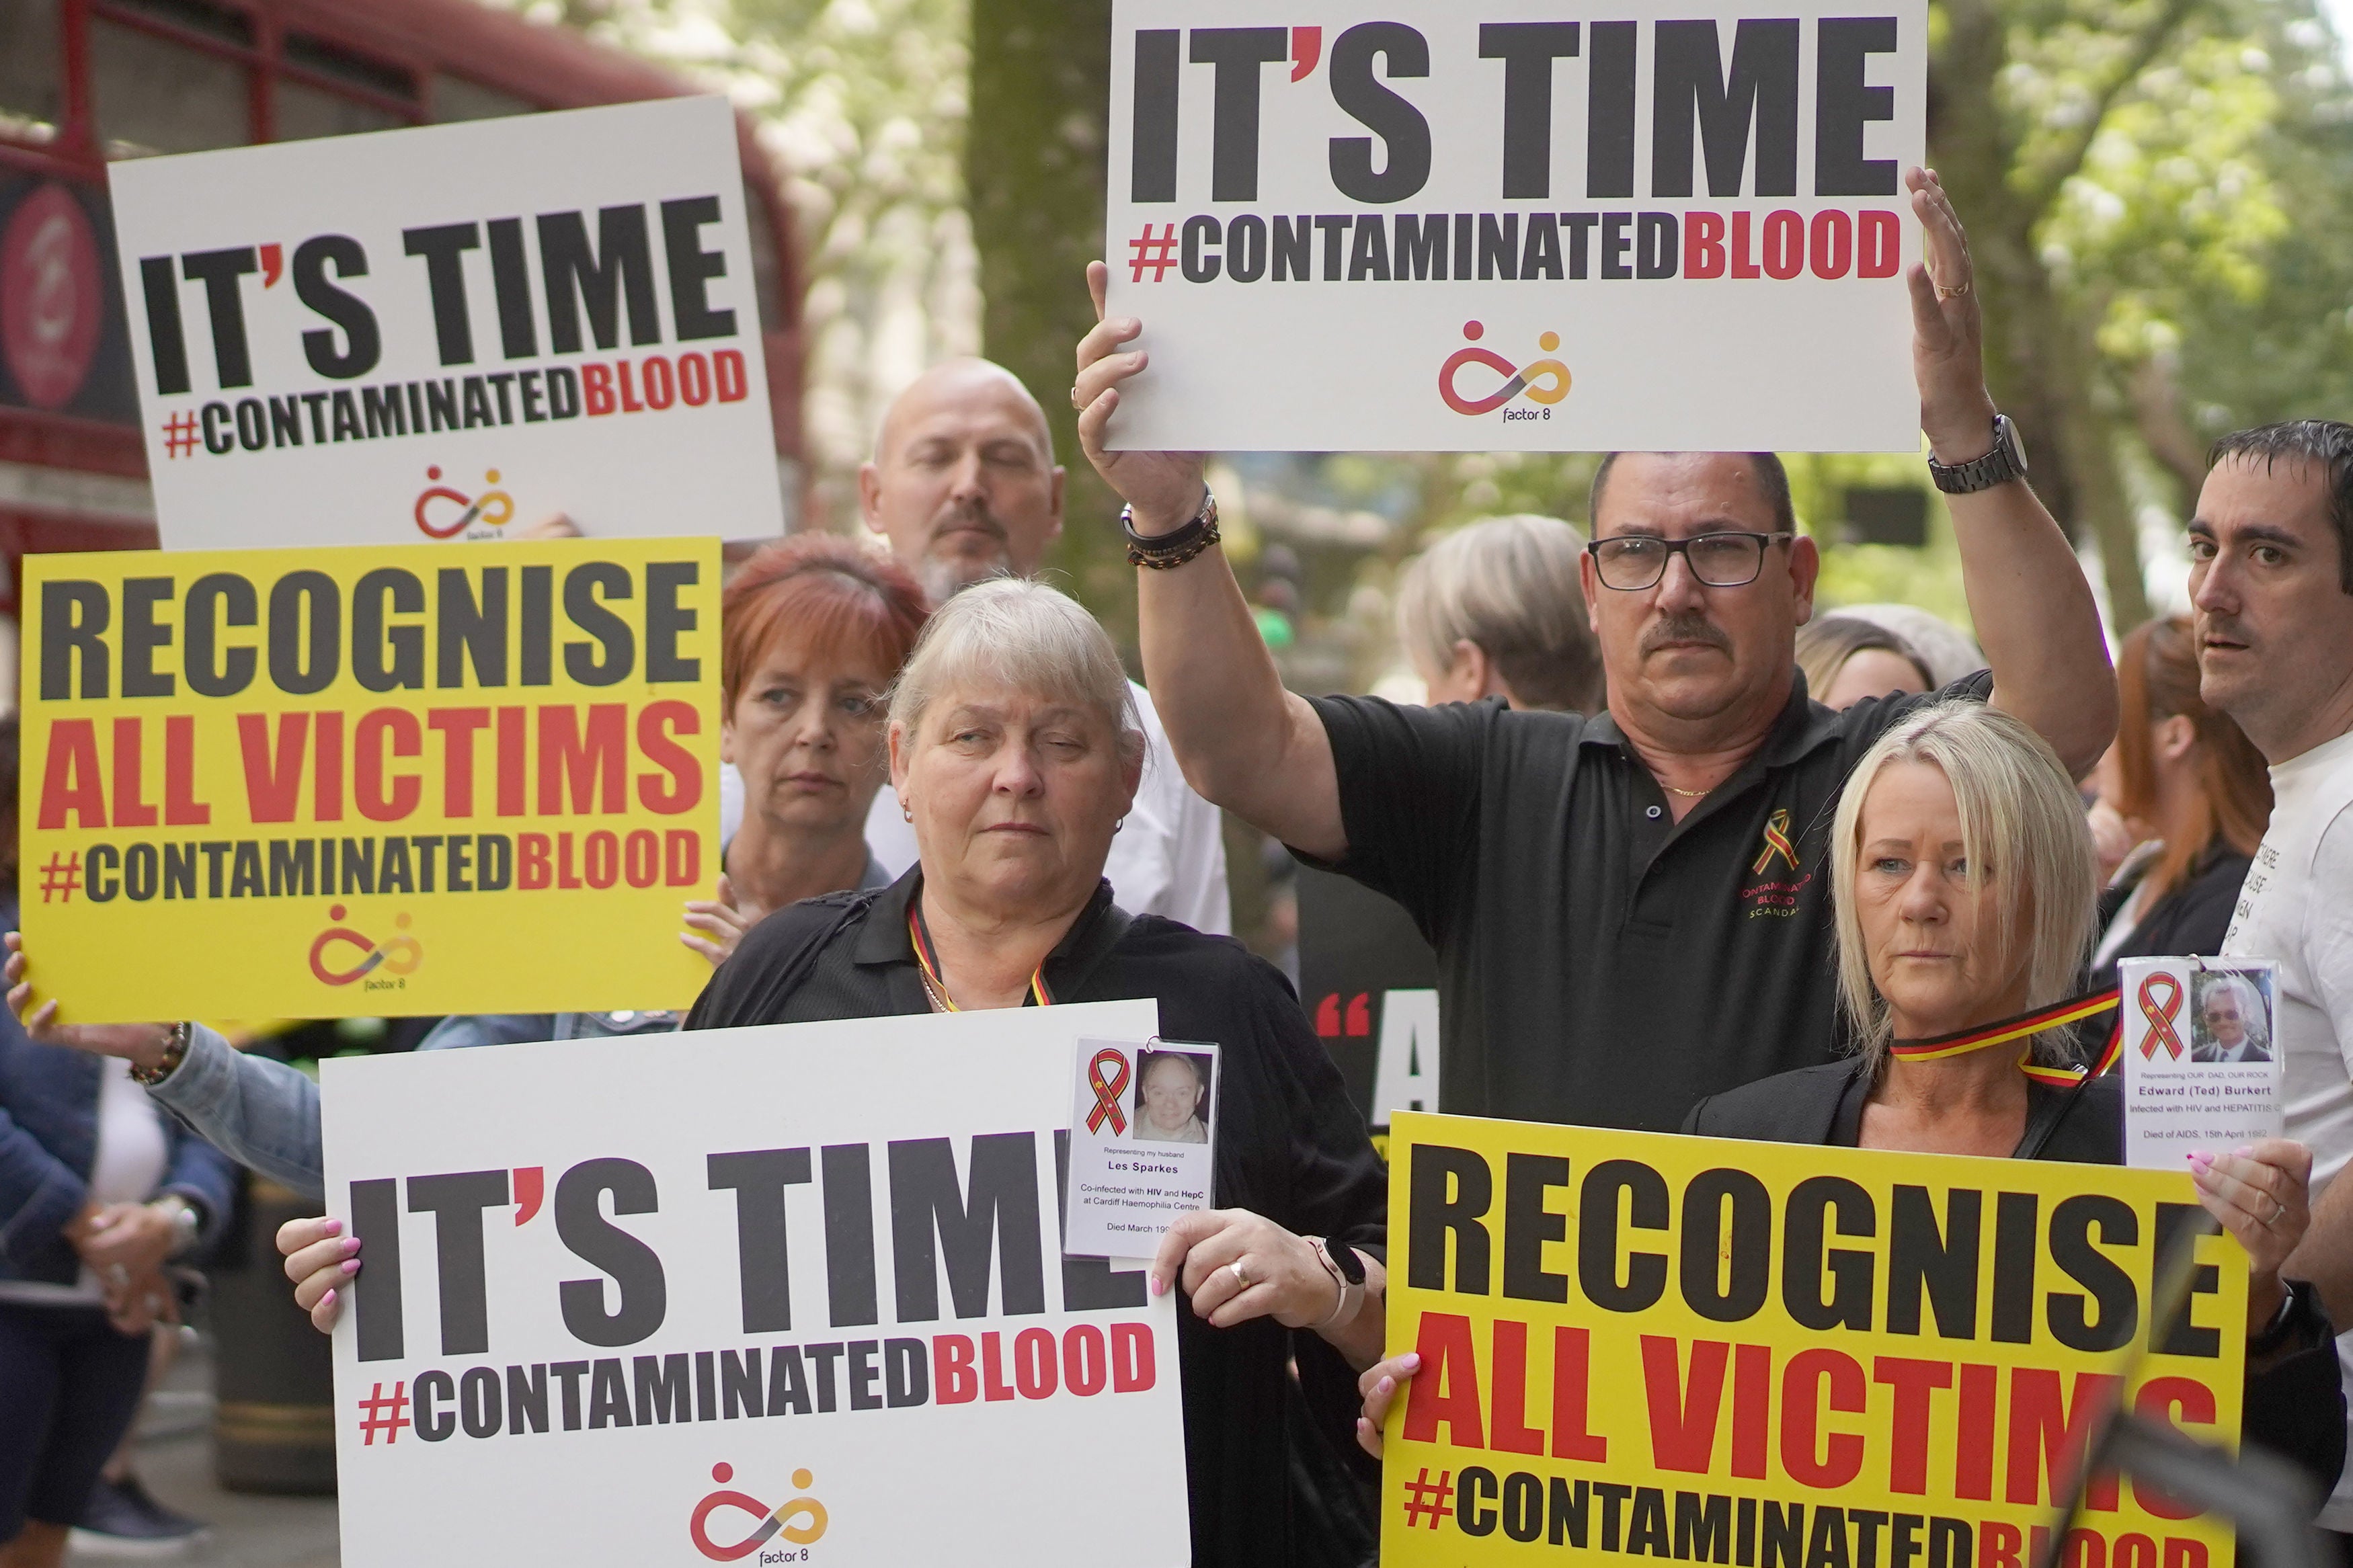 Infected blood victims would welcome a Post Office scandal-style TV drama about their experience